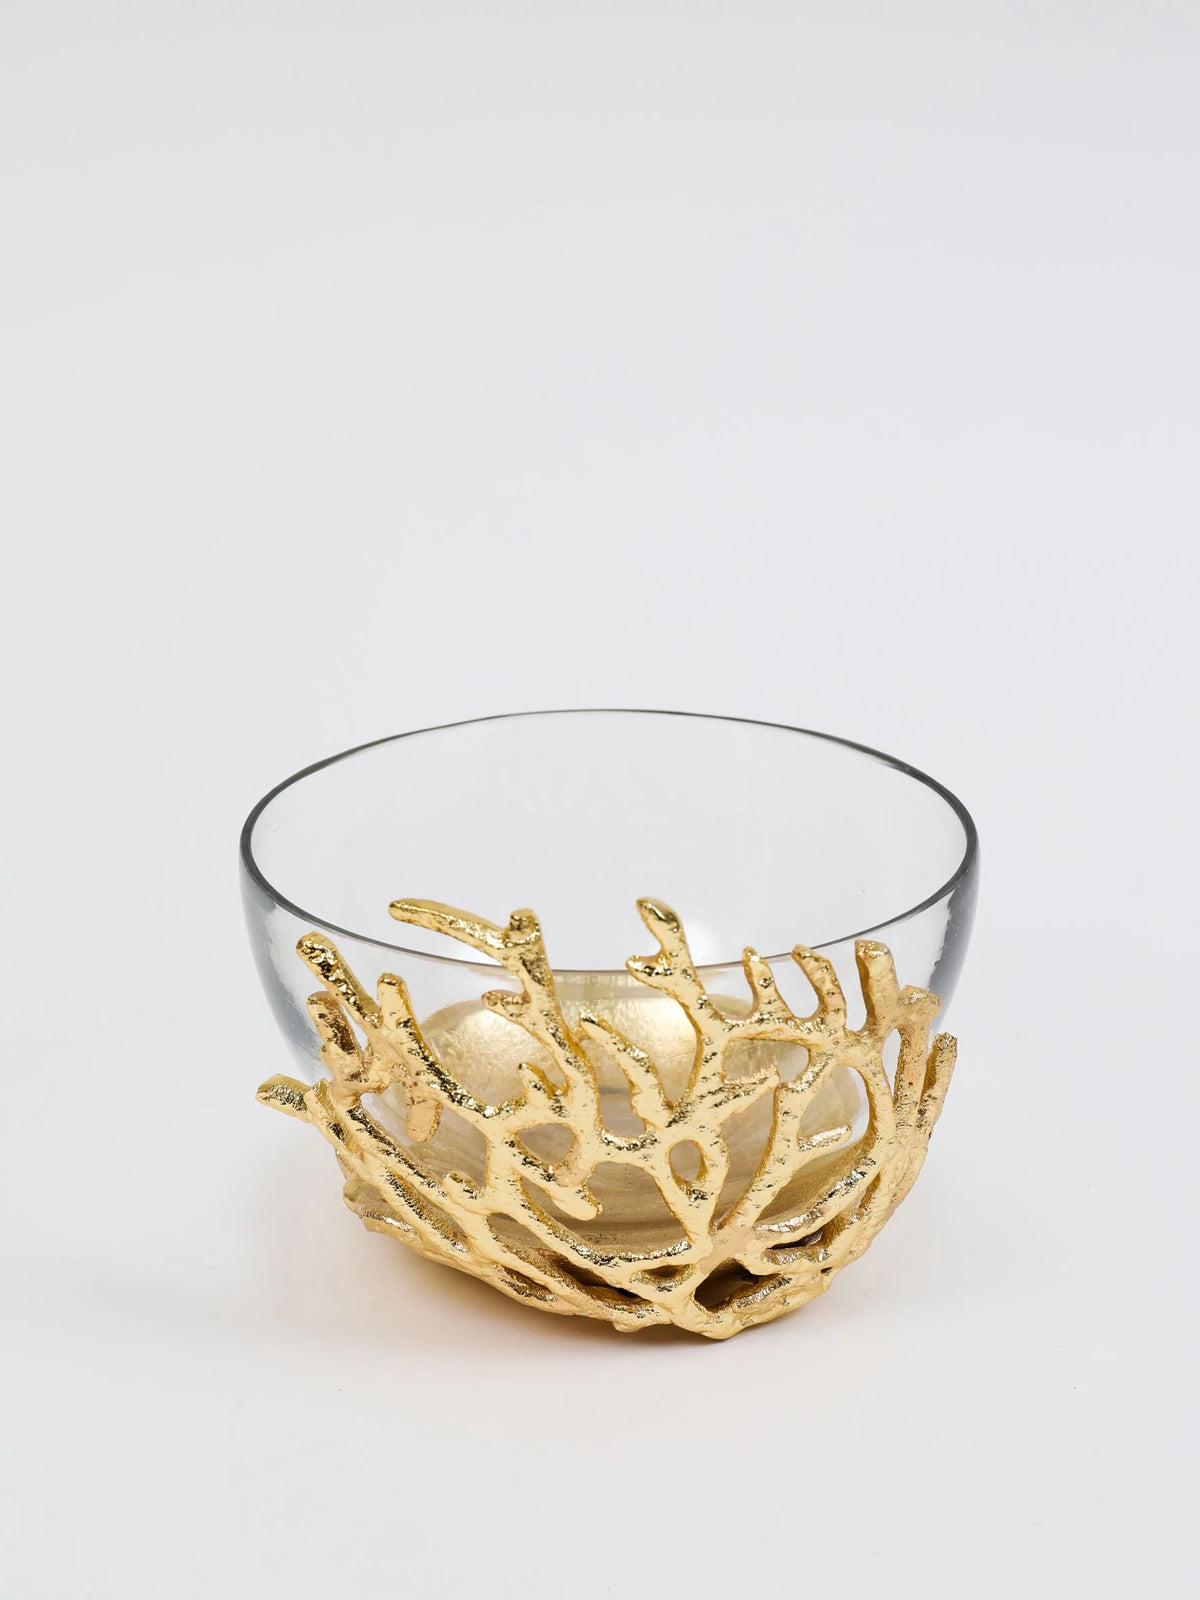 Glass Bowl with Gold Branch Design, Size Small.